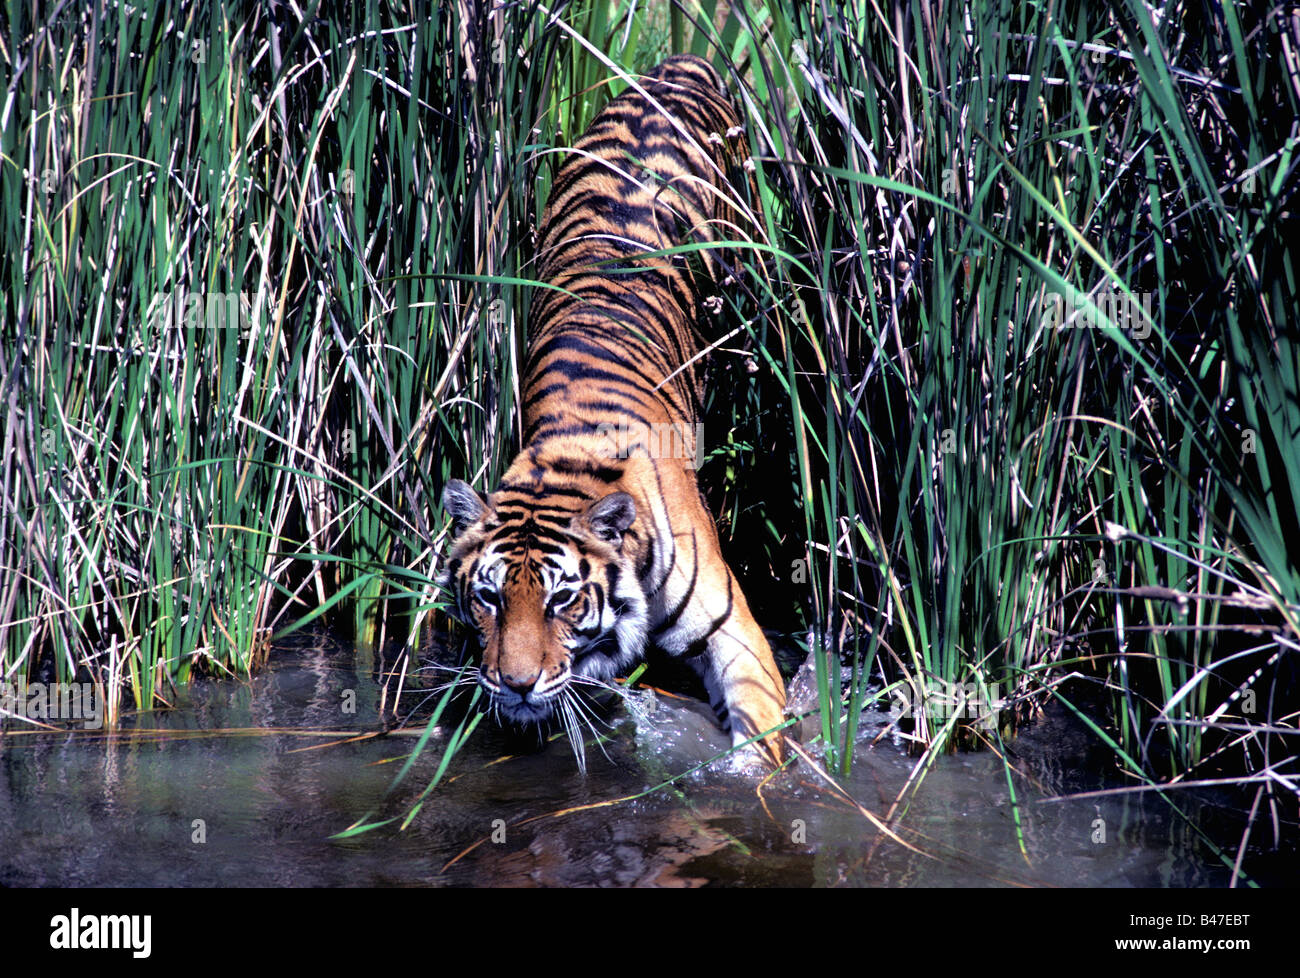 Sumatran tiger (Panthera tigris sumatrae), the smallest of all tigers, enters a river. They have webbing between their feet. Stock Photo